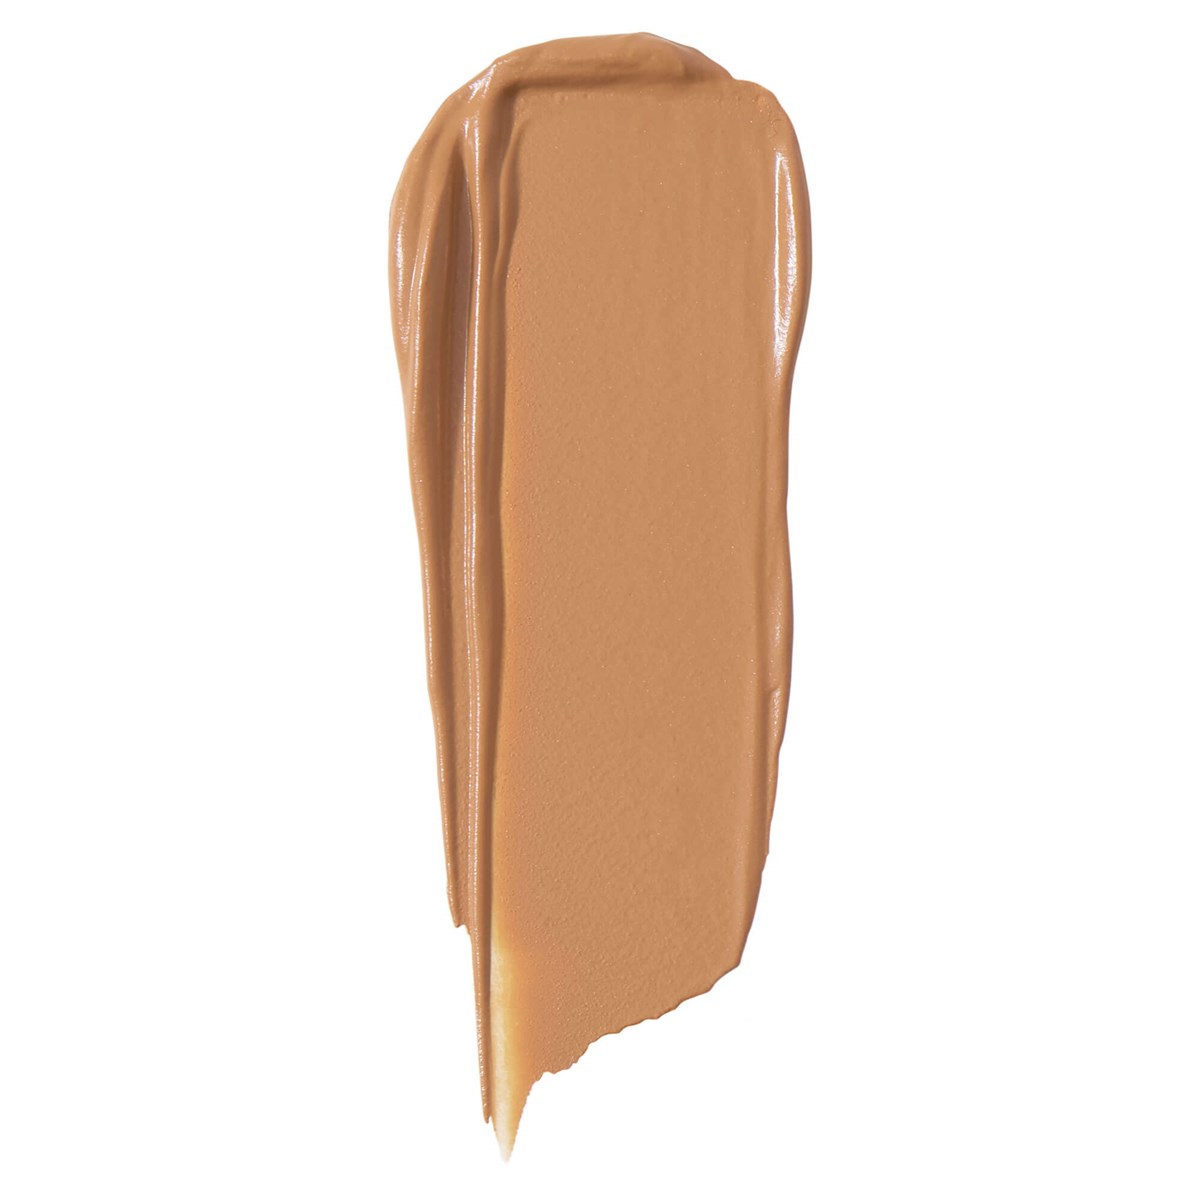 Benefit "Boi-ing Bright On" Concealer Almond shade